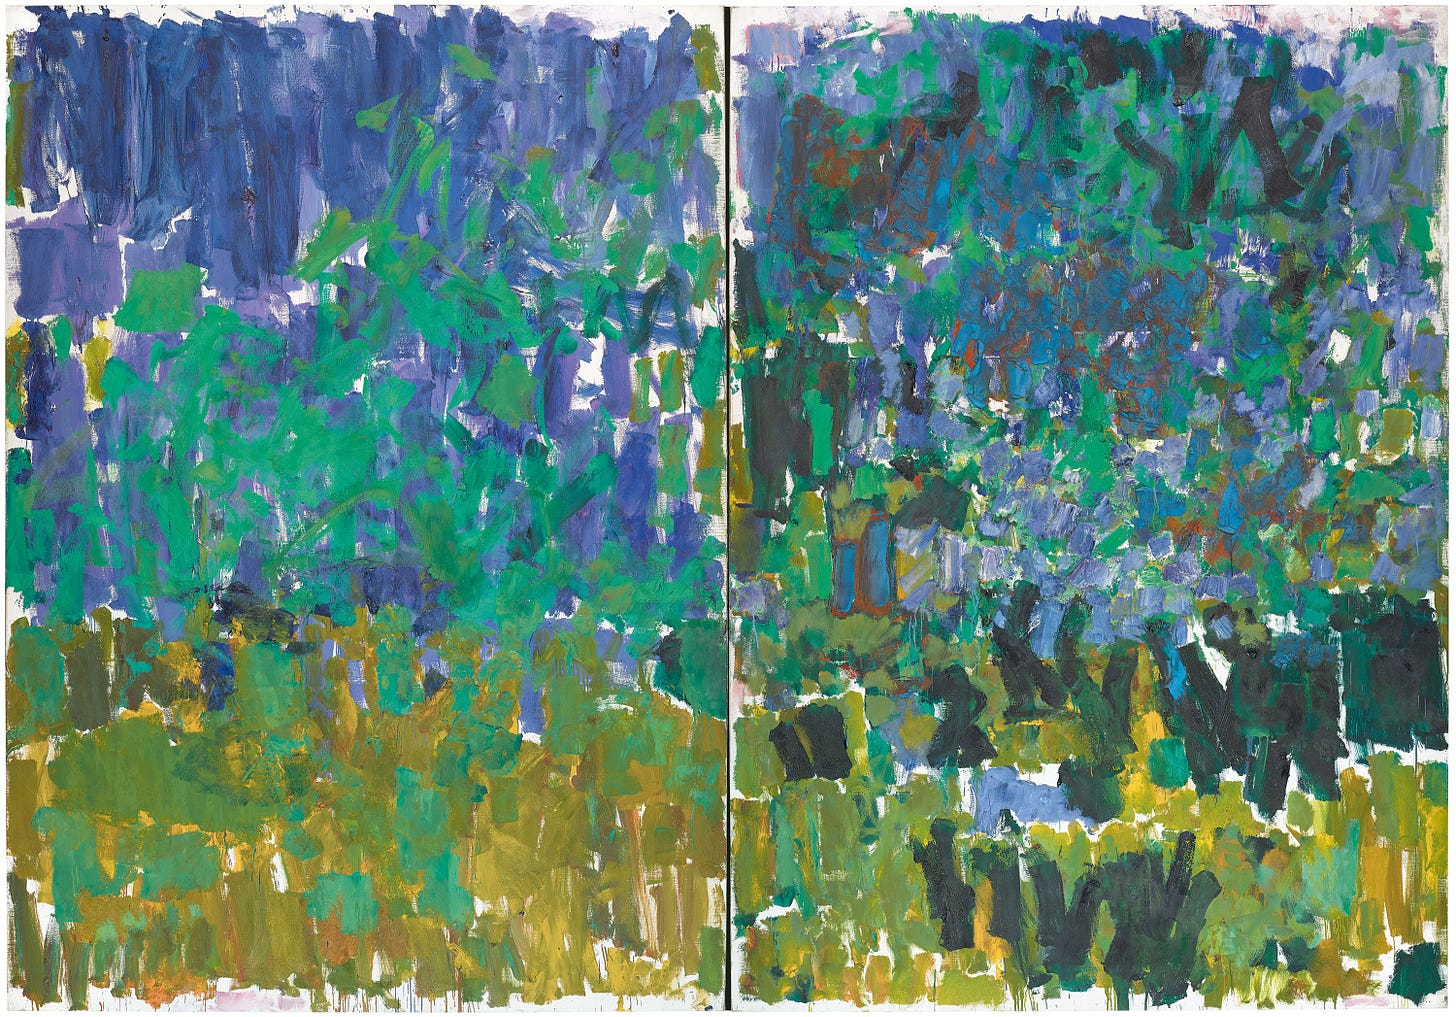 Posted, 1977, abstract painting by artist Joan Mitchell